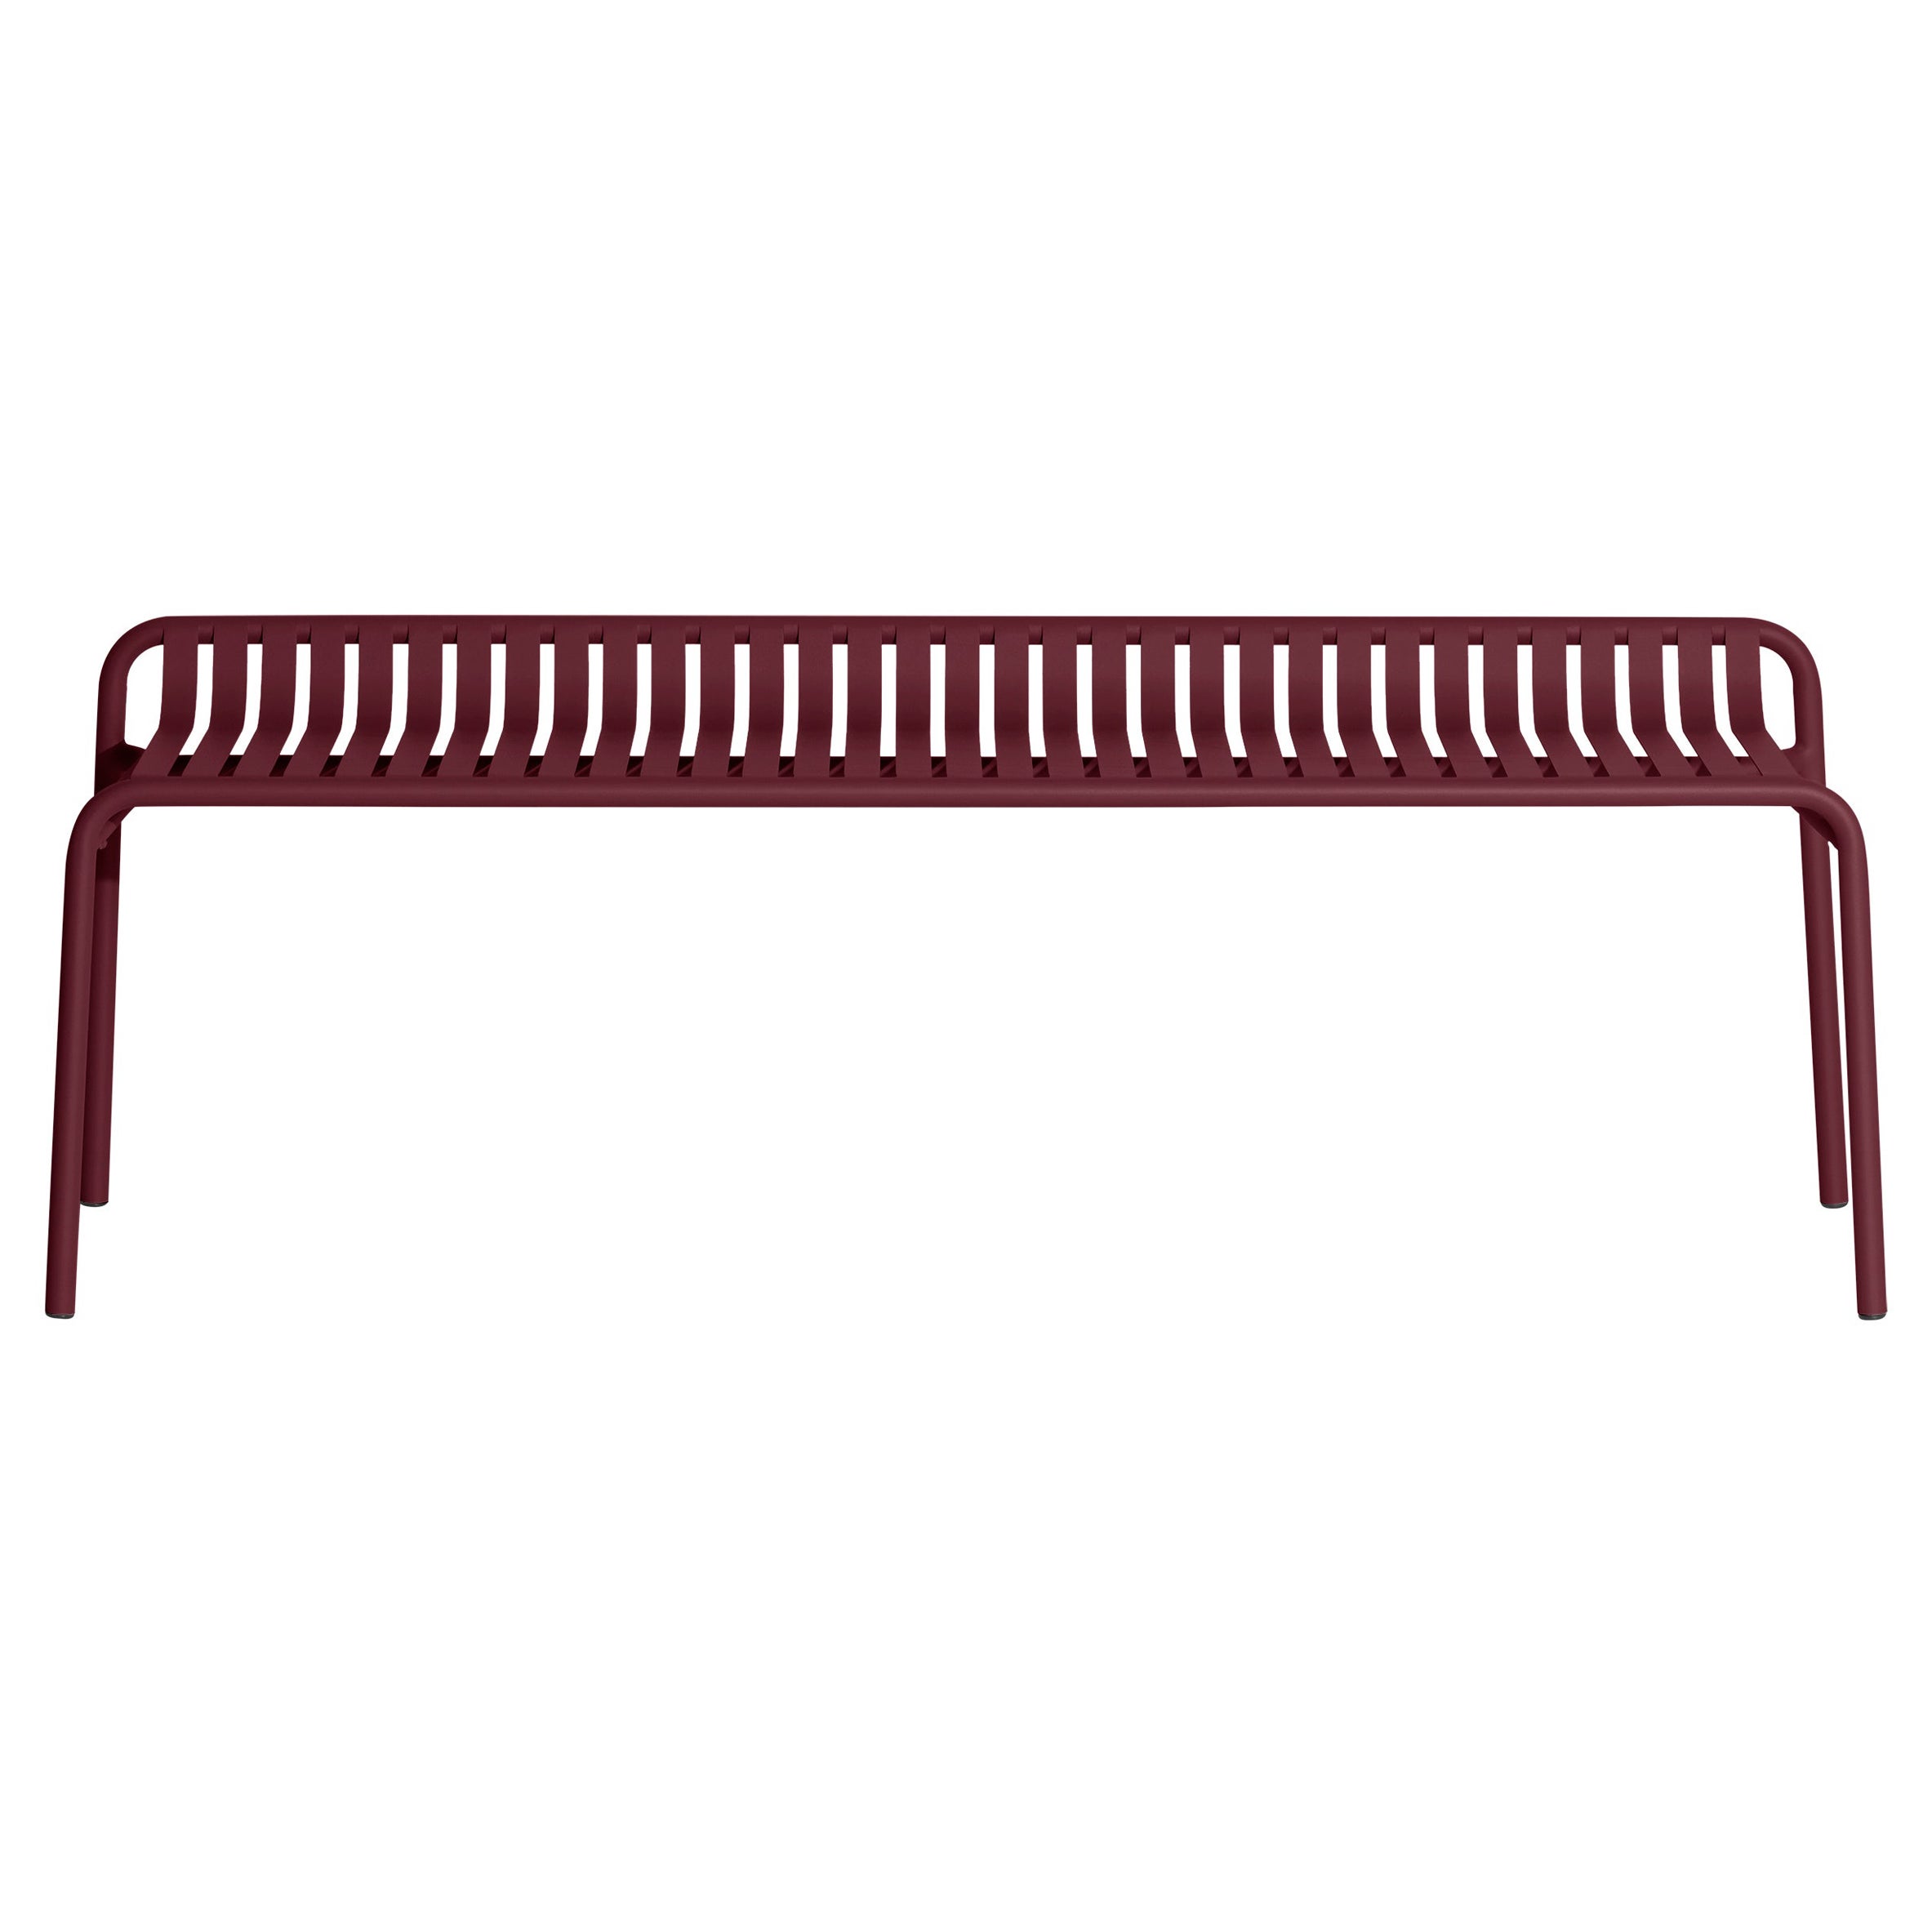 Petite Friture Week-End Bench without Back in Burgundy Aluminium, 2017  For Sale